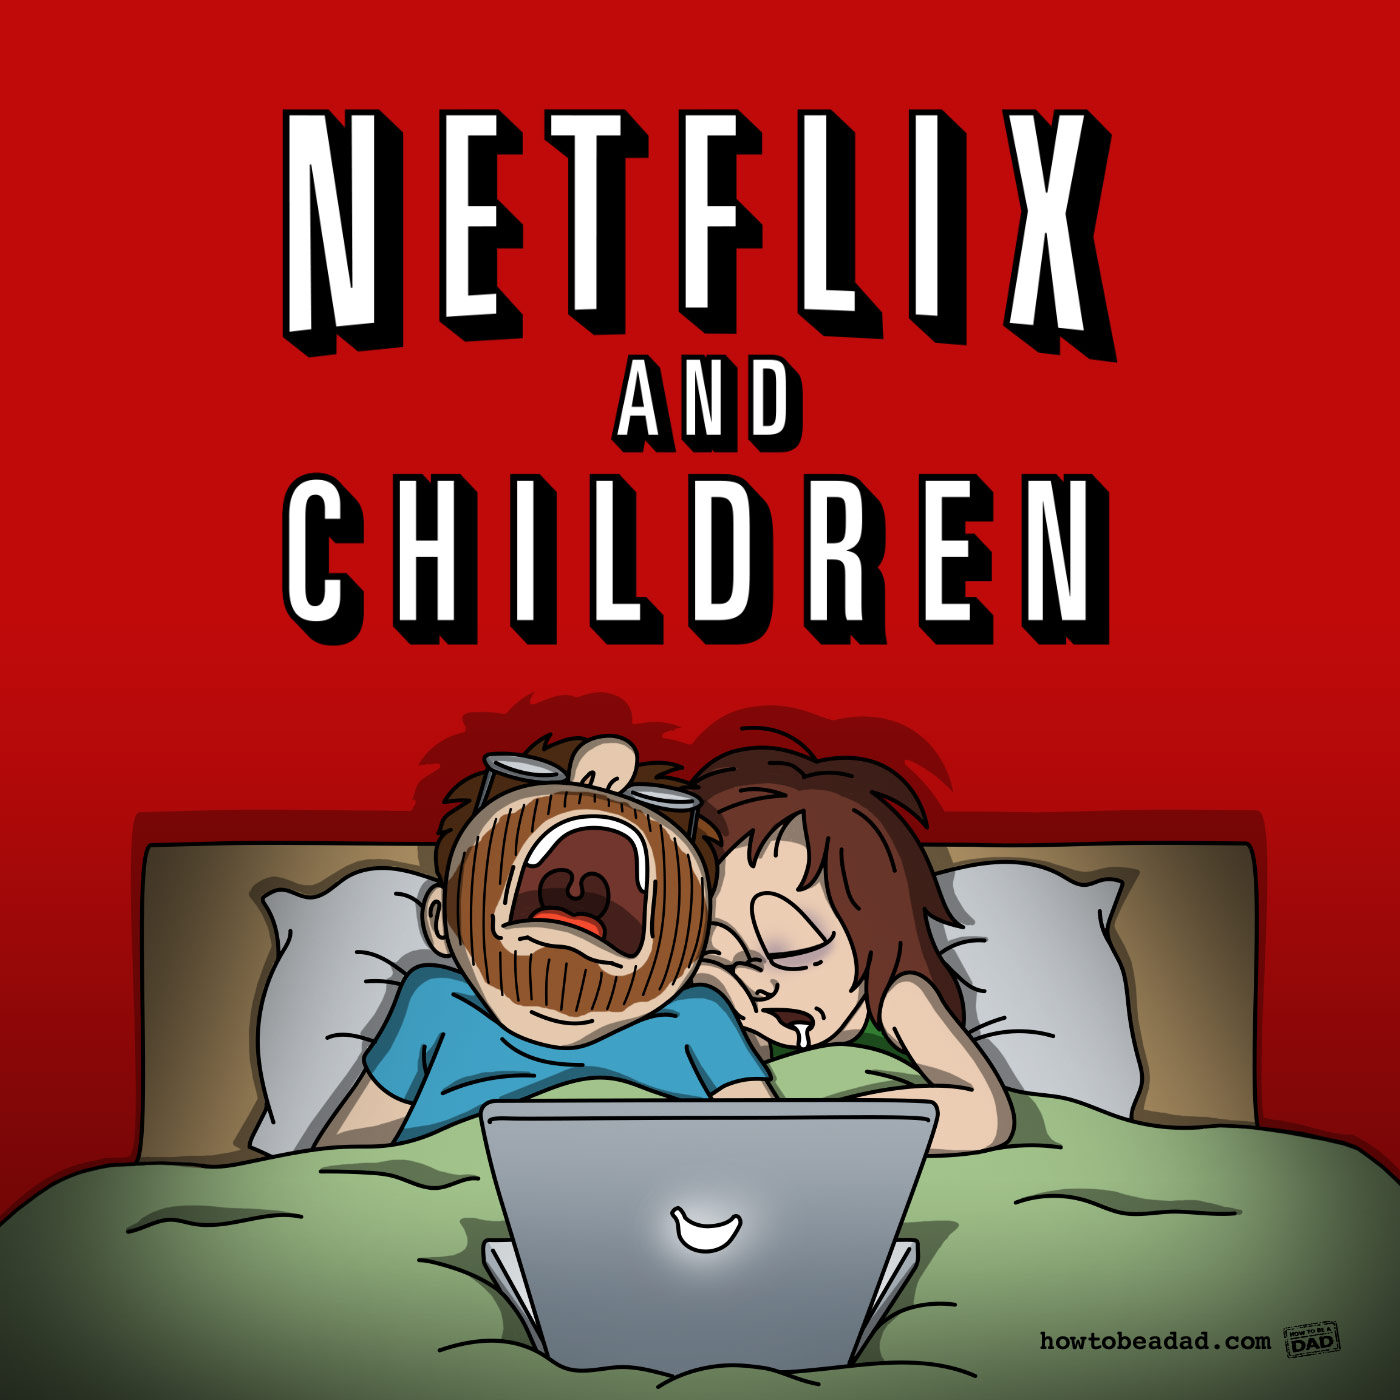 Netflix and Children funny image